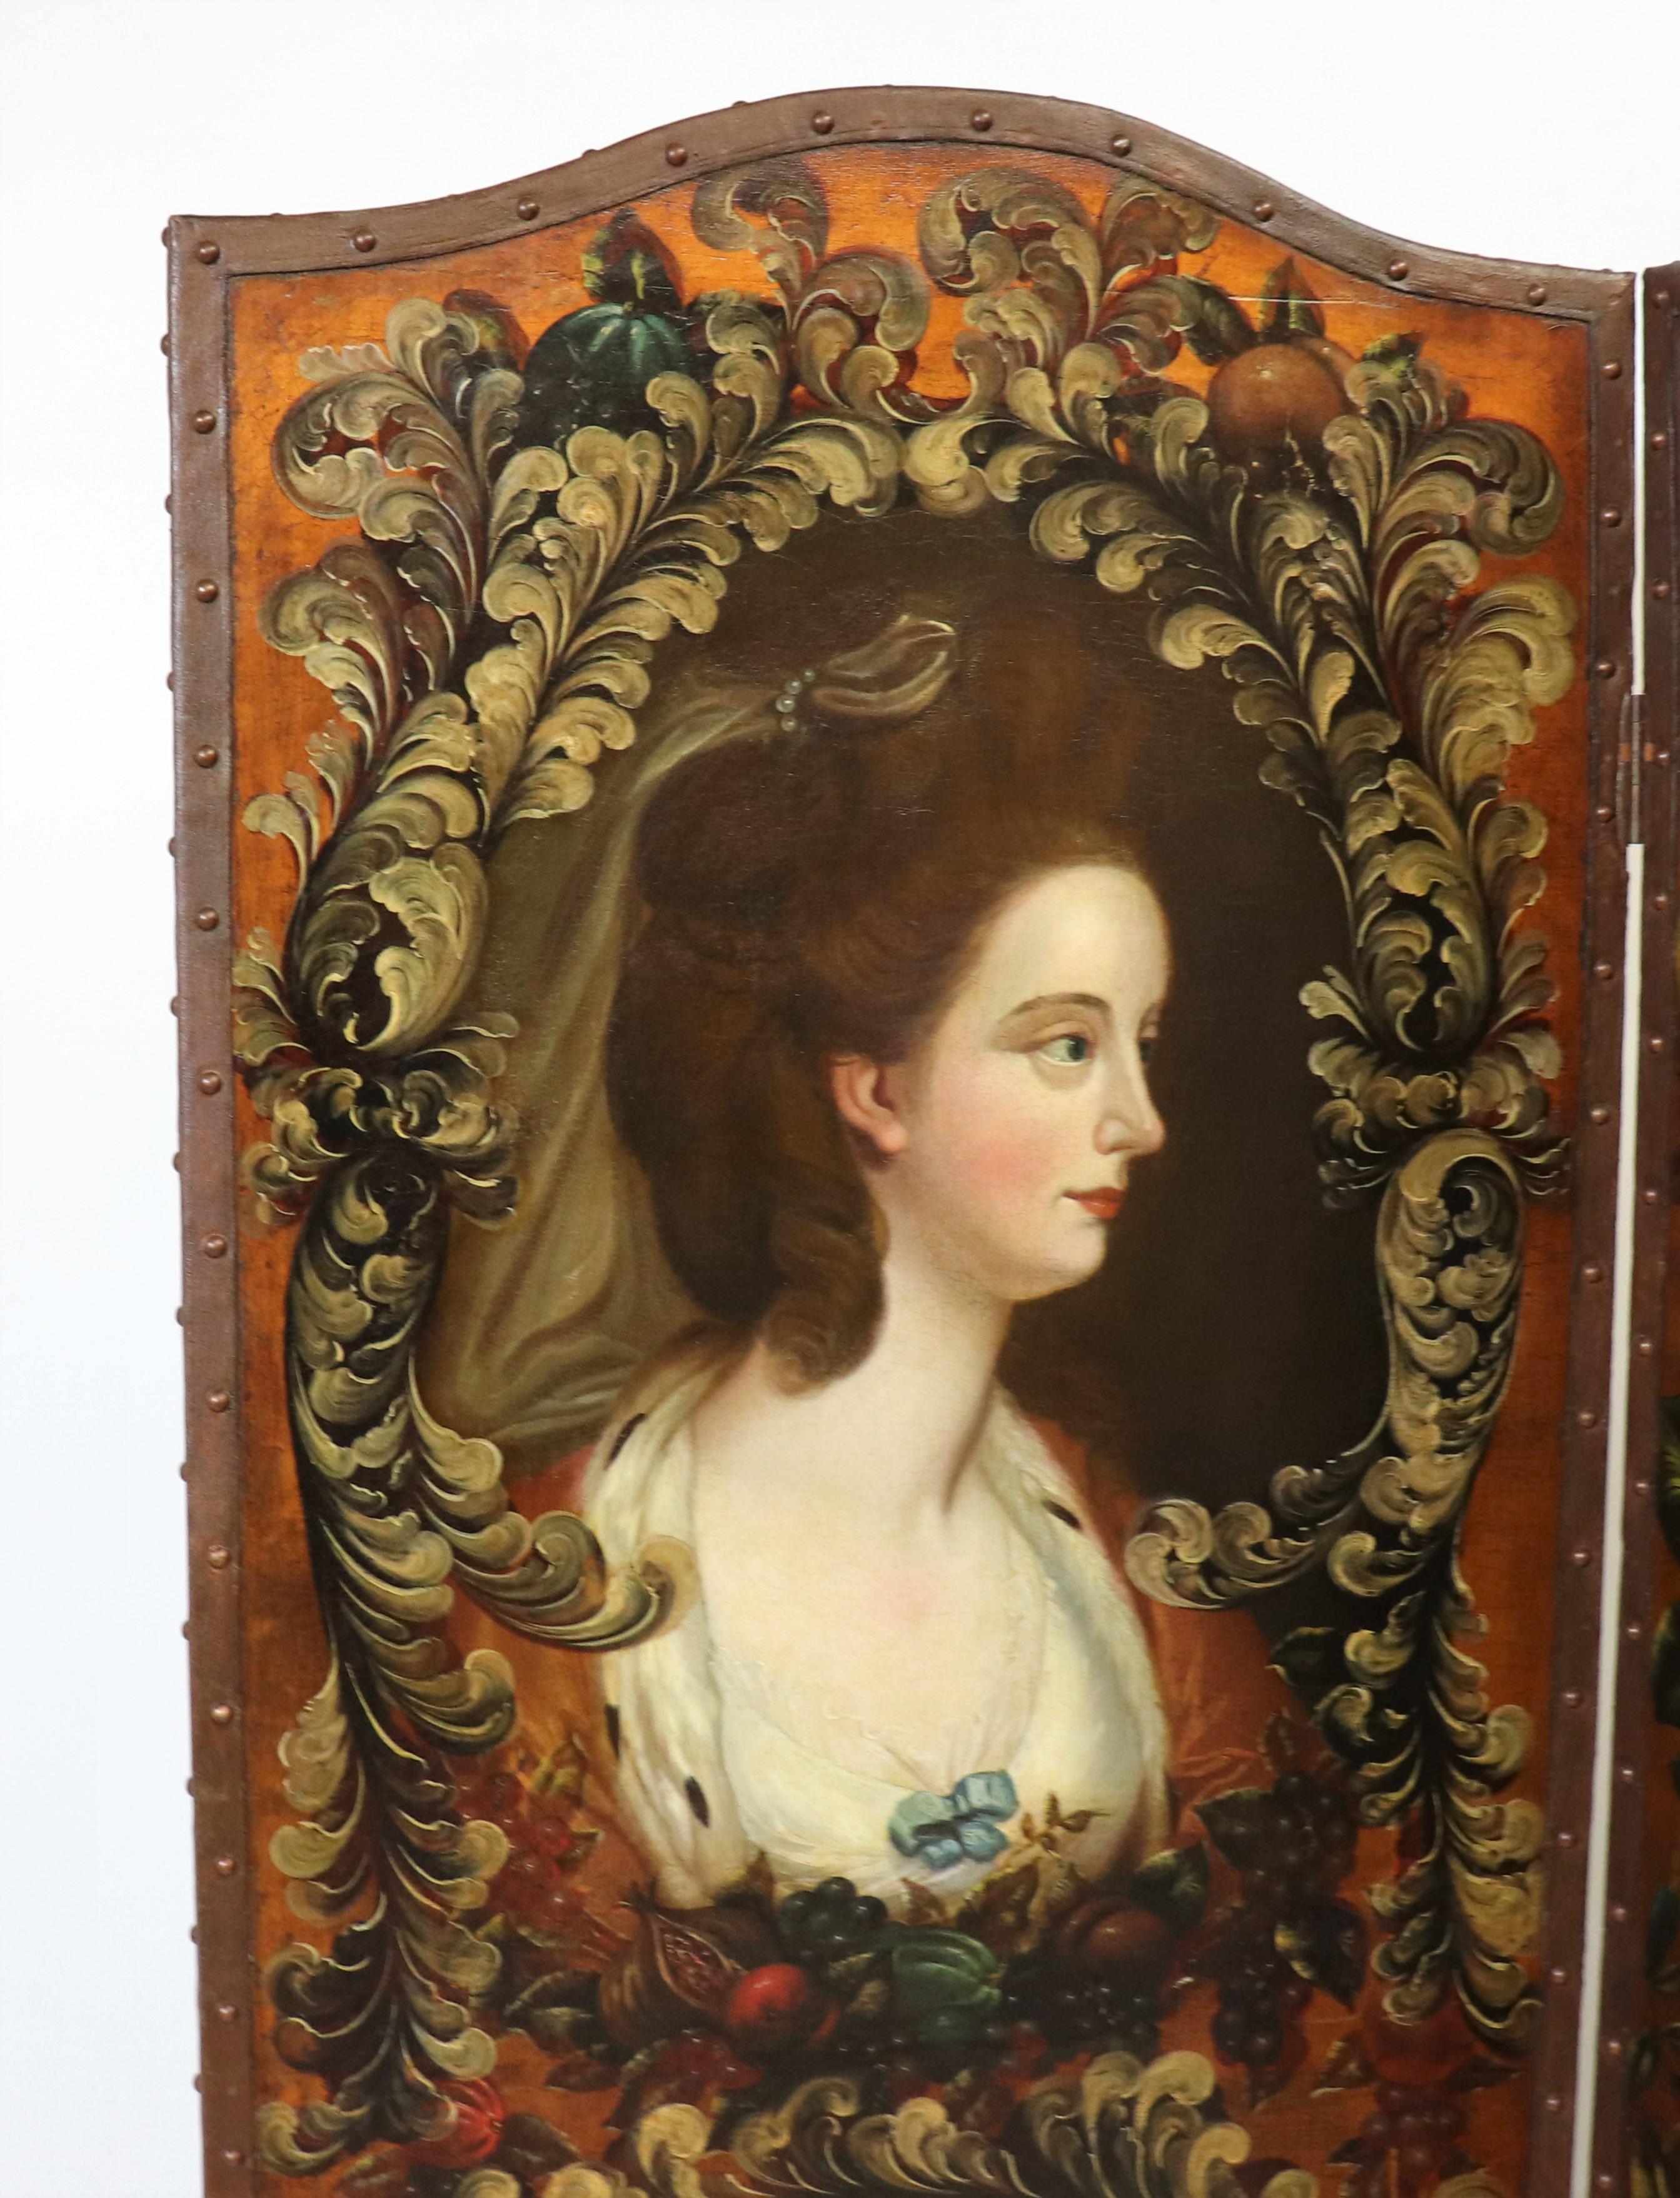 This is a rich-looking 19th-century hand-painted floor screen with a portrait gallery. The materials make it 19th-century, but the subjects are dressed in 18th-century attire. We are not certain if the portrait gallery started as a screen or was